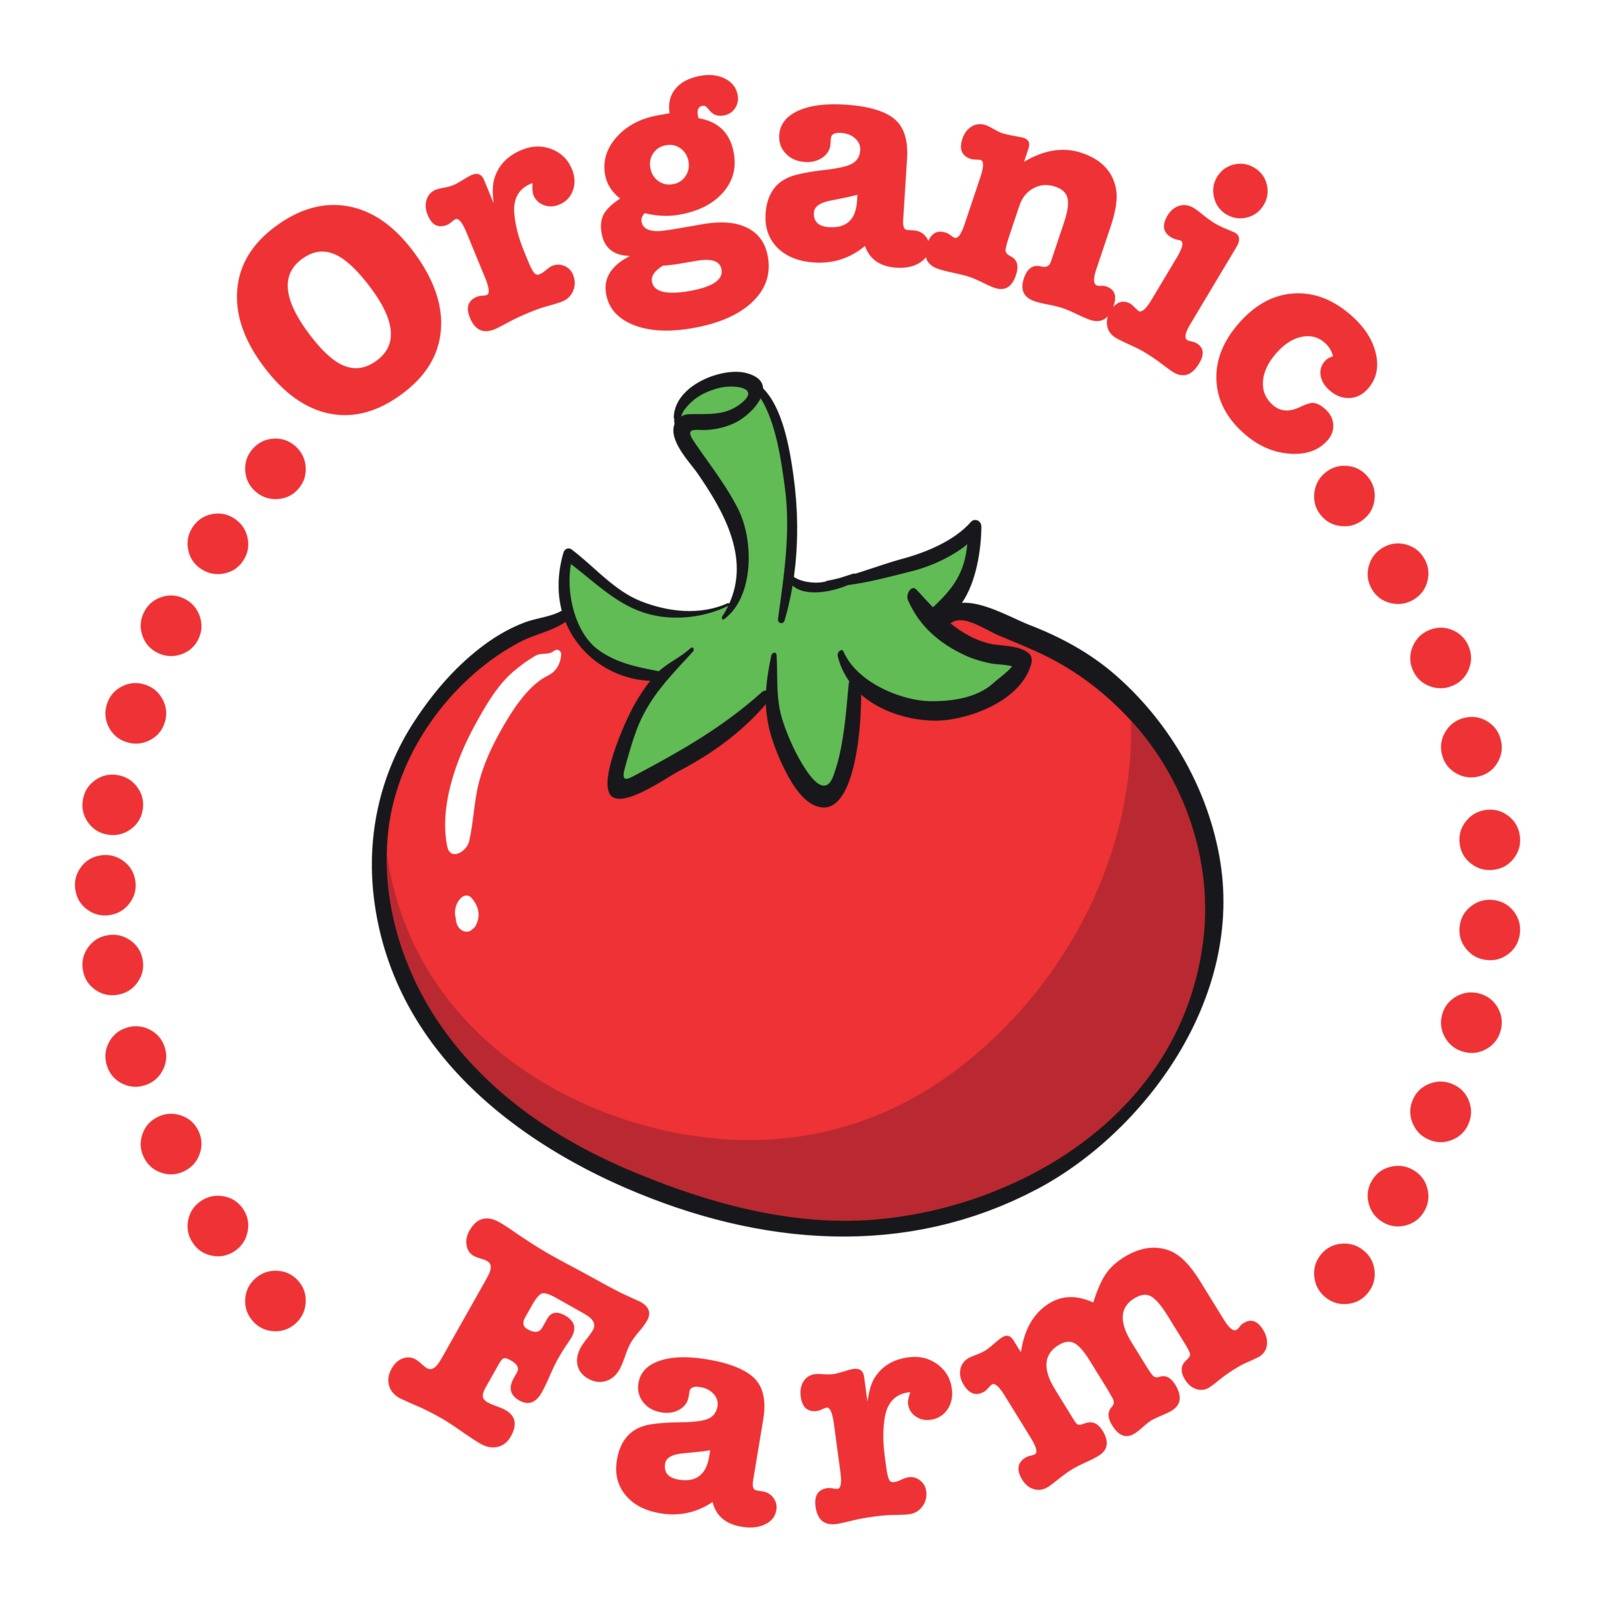 Illustration of an organic farm on a white background